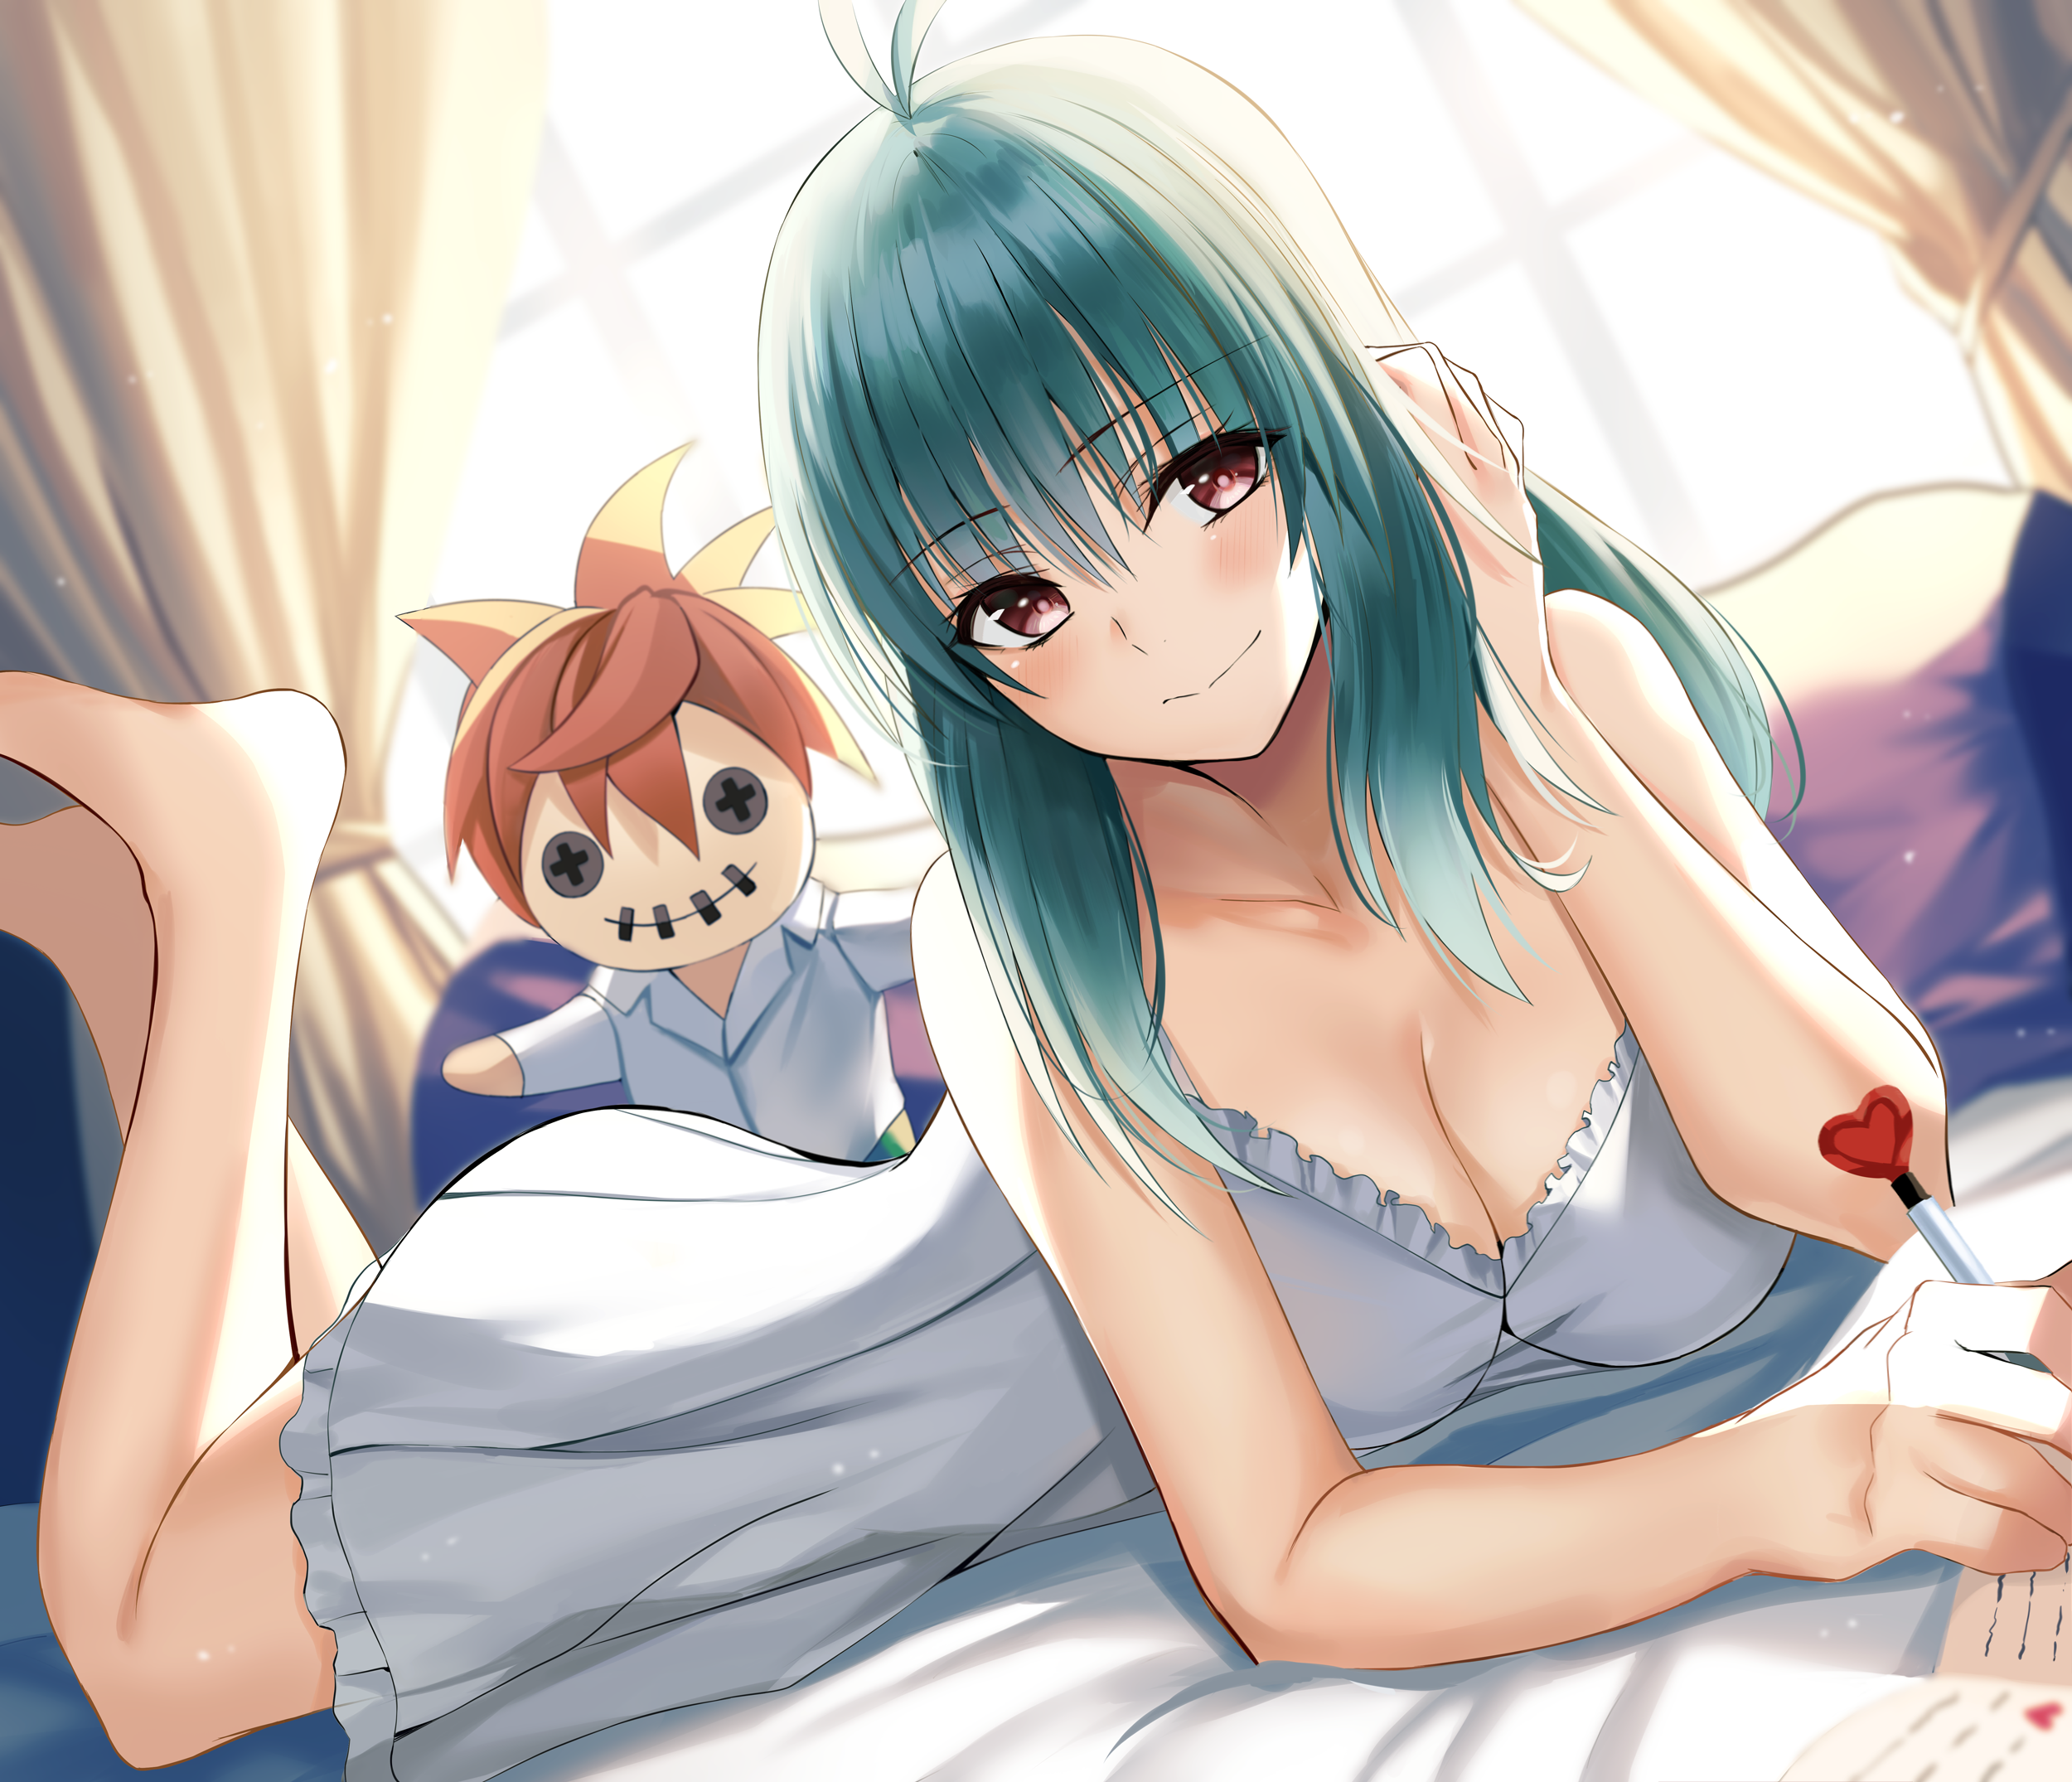 Anime 2500x2150 anime anime girls digital art artwork 2D portrait To Love-ru Nicky W in bed lying on front cleavage green hair brown eyes barefoot dress sun dress feet in the air